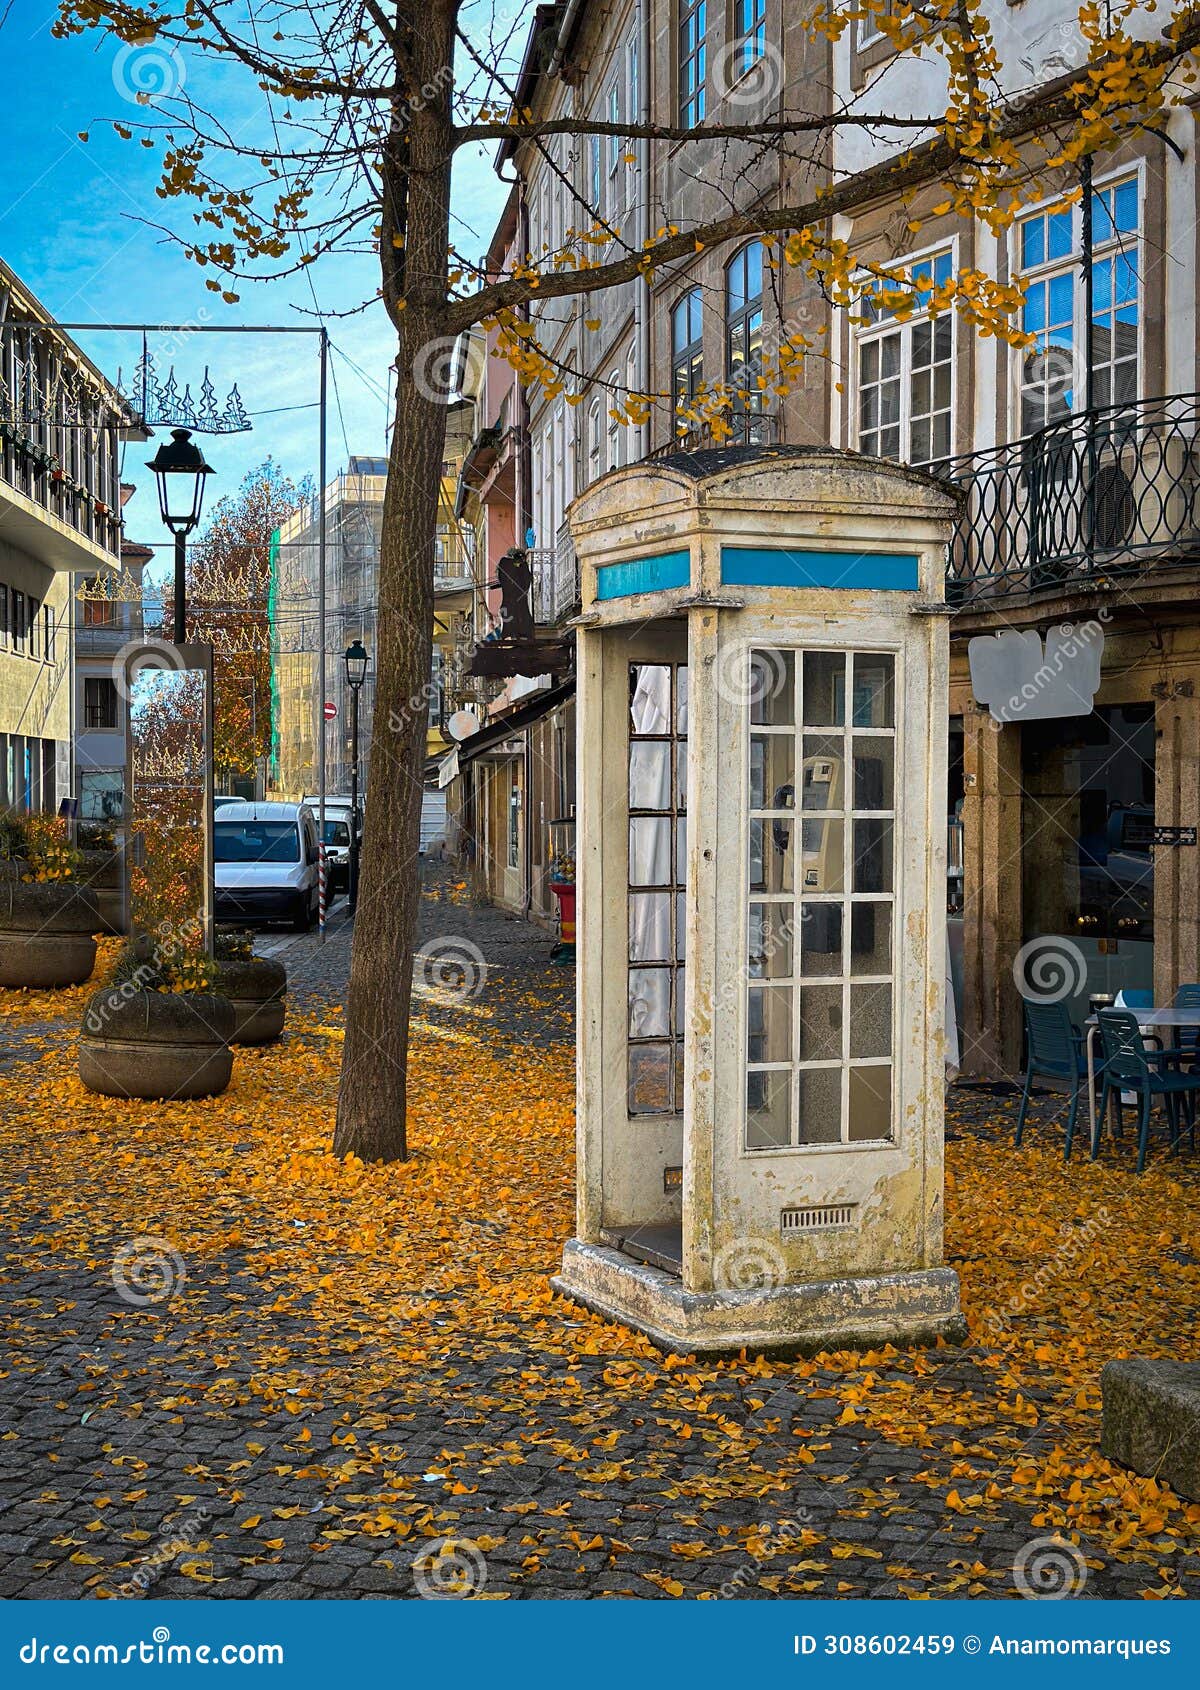 autumn city landscape with typical white telephone booth in chaves, vila real, tras os montes, portugal